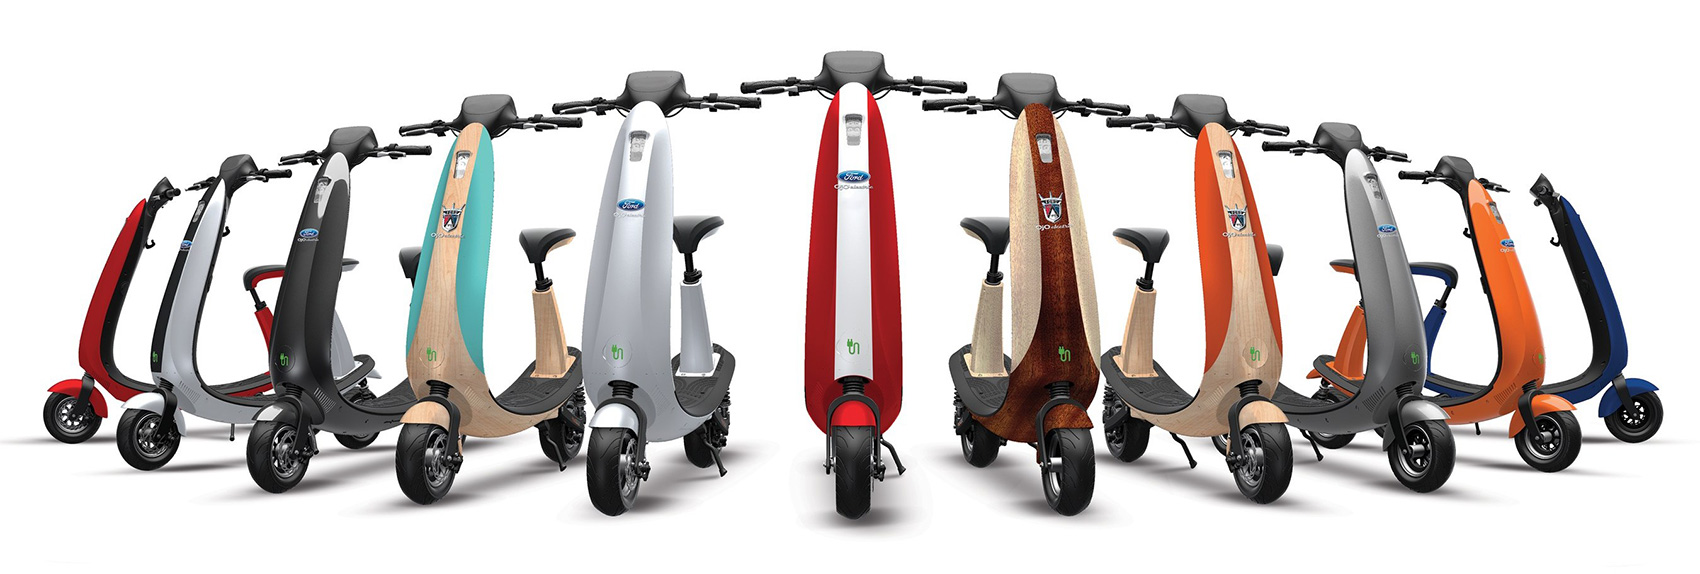 Xe điện Ford OjO Commuter Scooter 